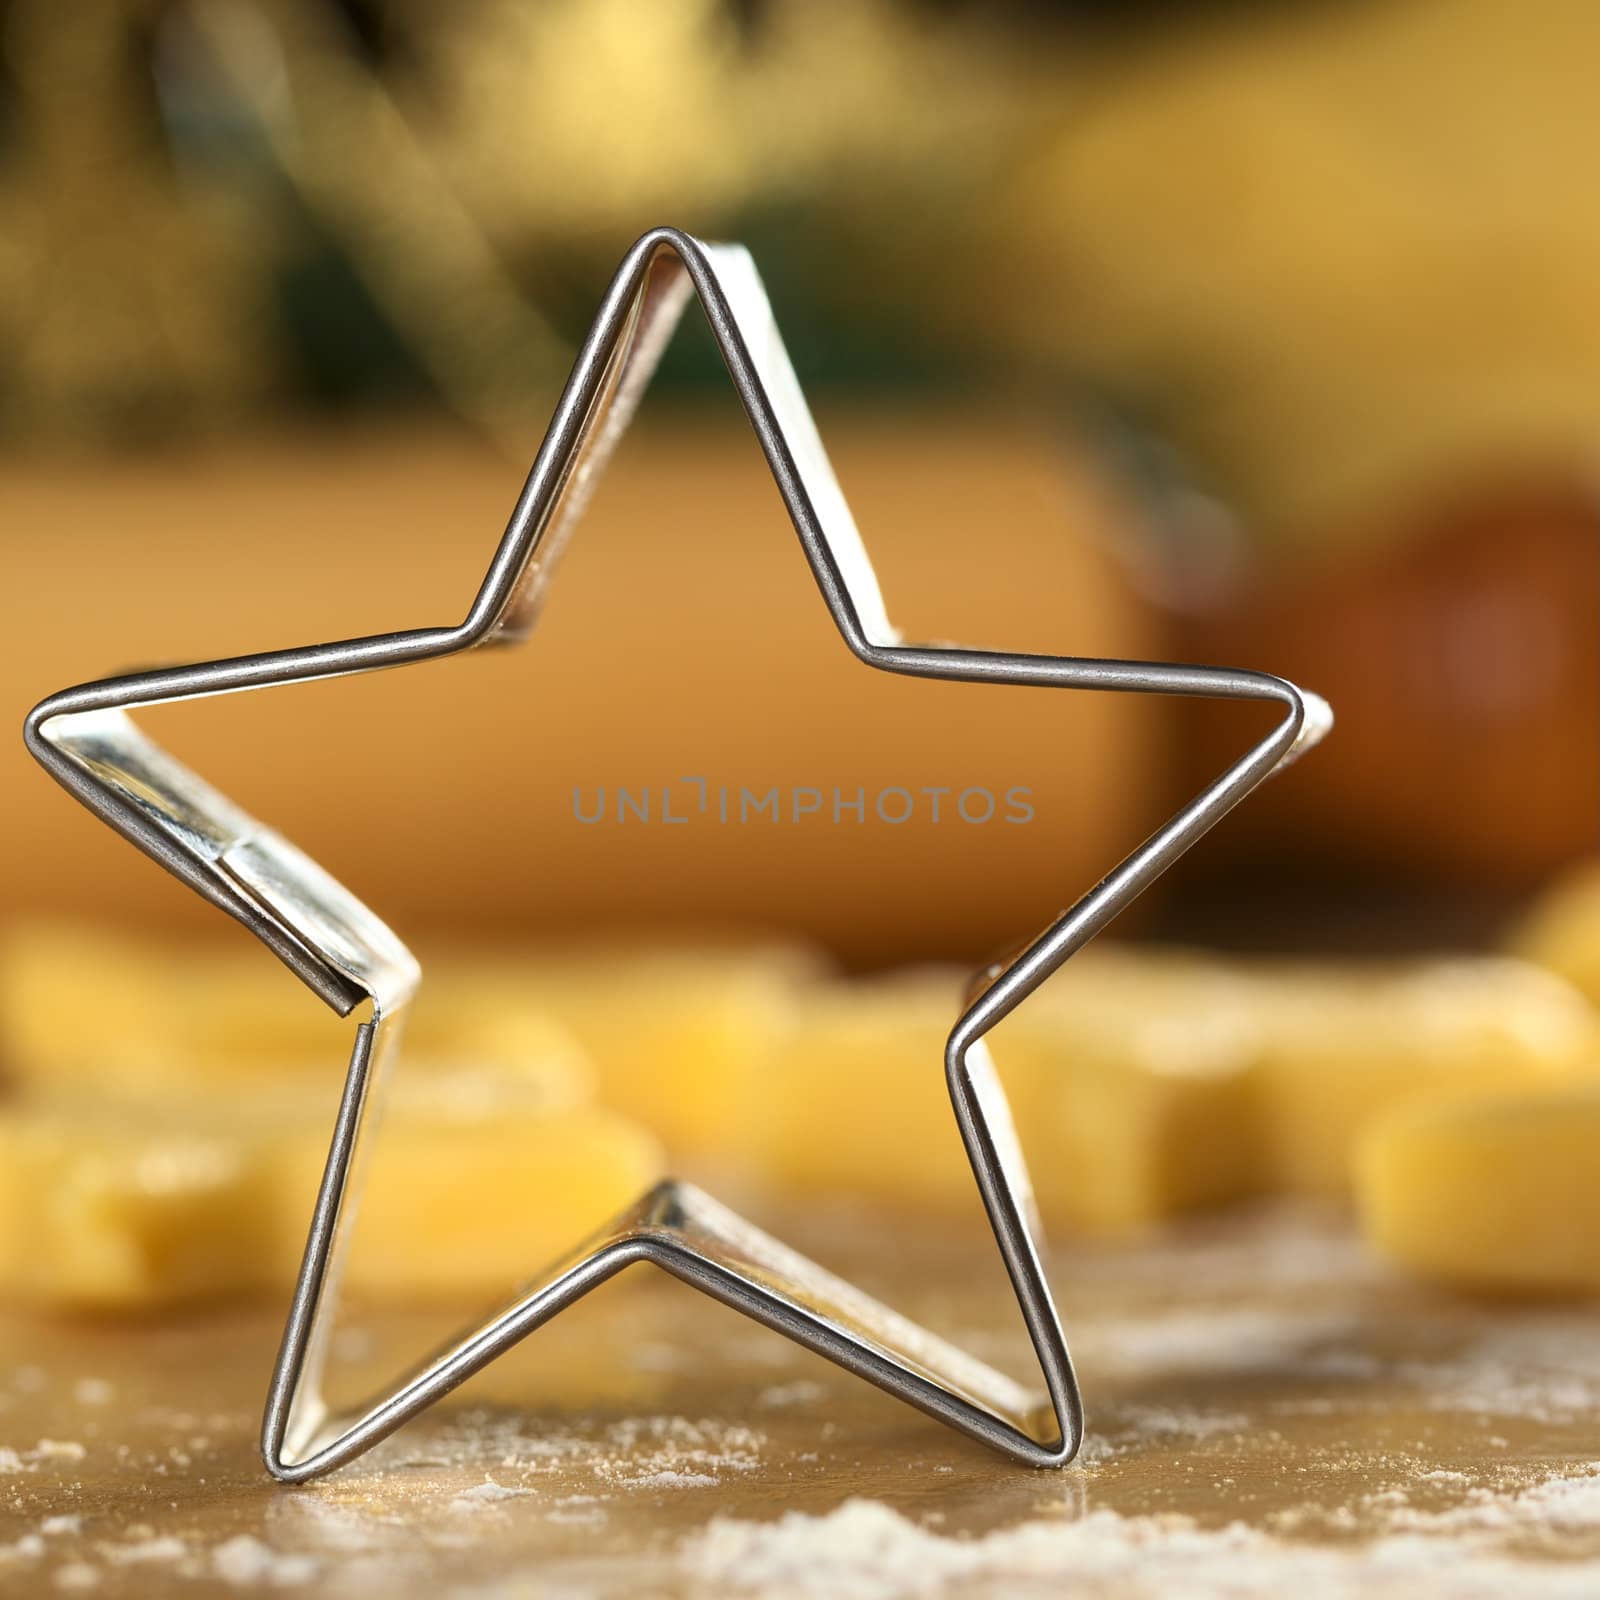 Star-shaped cookie cutter with raw cookies and rolling pin in the back (Selective Focus, Focus on the front edge of the cutter)  